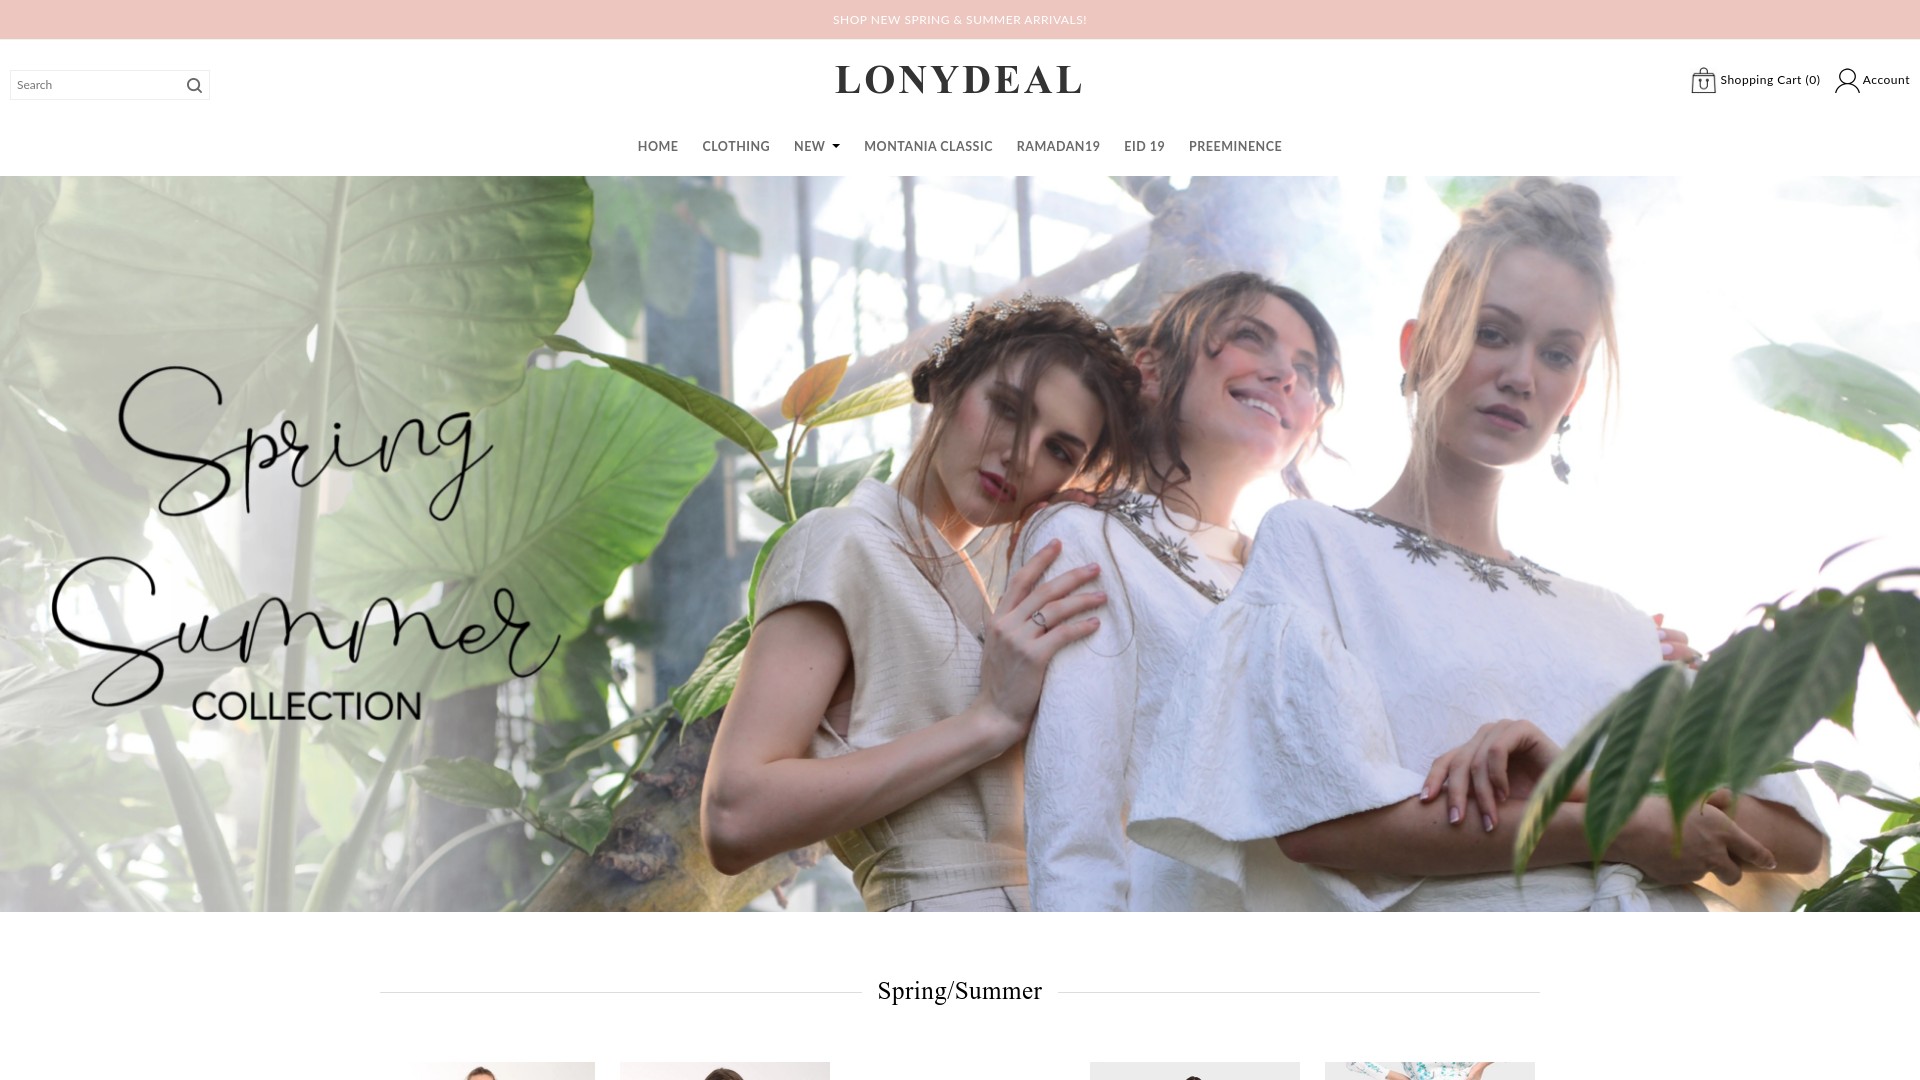 Lonydeal located at lonydeal.com